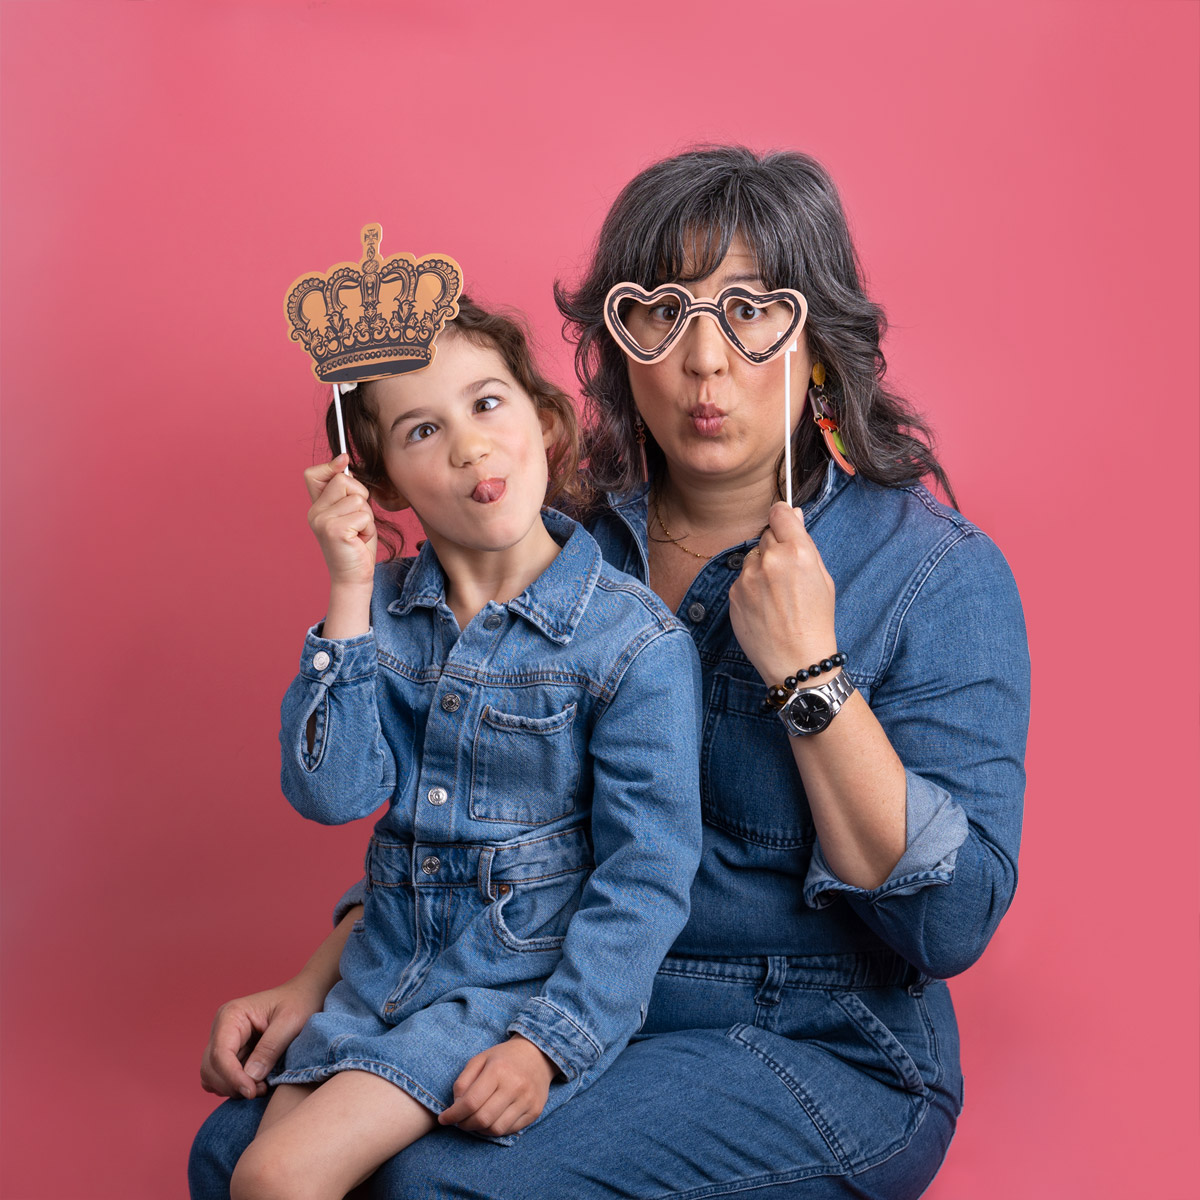 A child sitting in her mom's lap while they both make silly faces in front of a red backdrop.